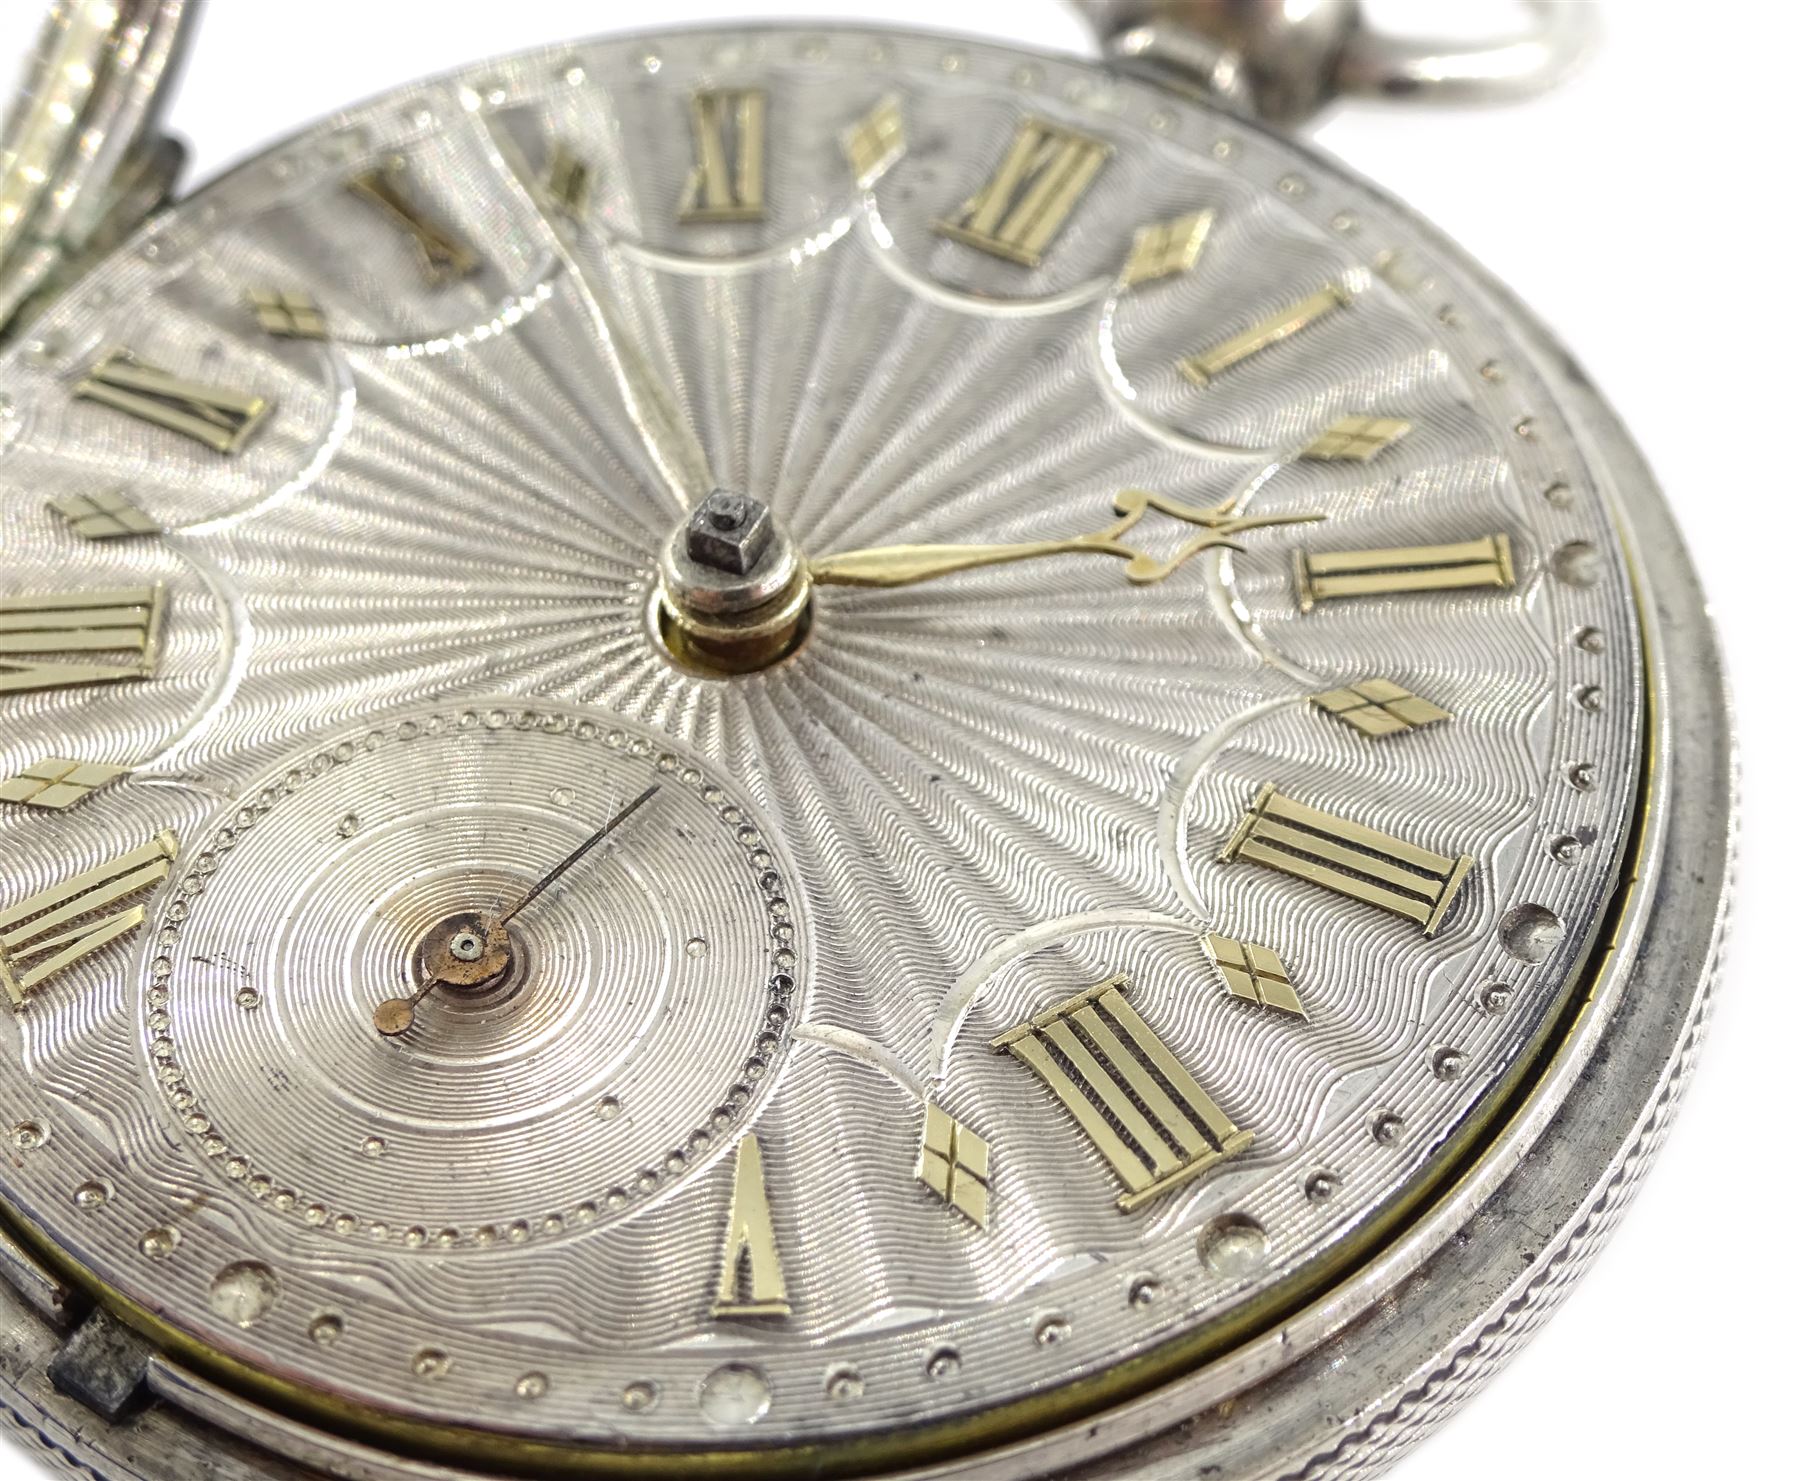 Victorian silver open face English lever fusee pocket watch by George Elliott, Kirk Burton, No. 8008 - Image 2 of 7